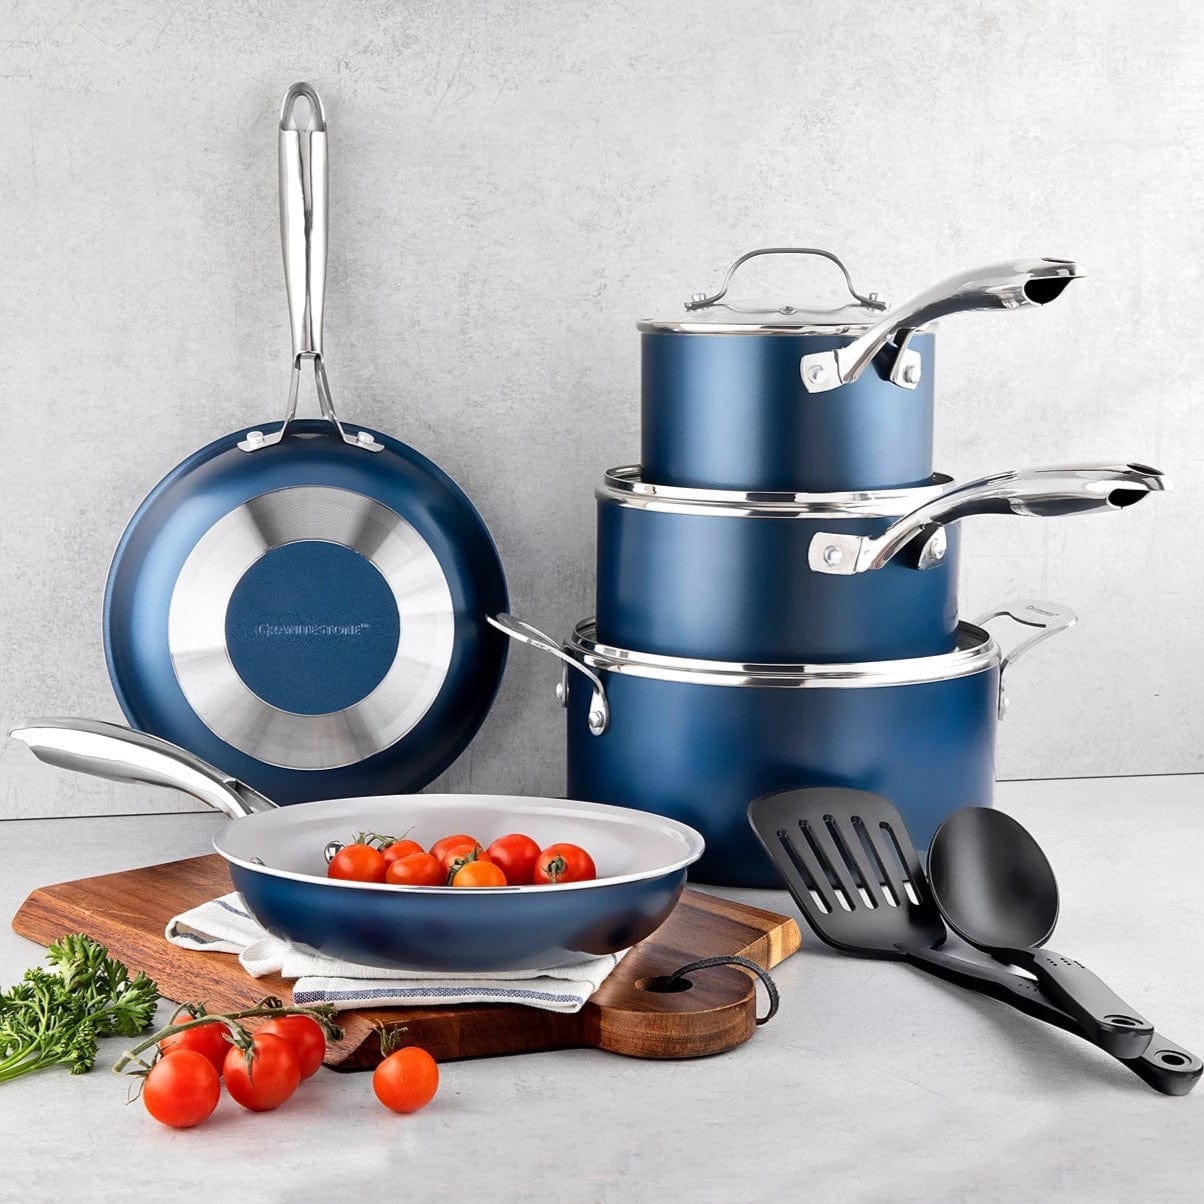 Granitestone Blue 5 Piece Nonstick Cookware Set with Stay Cool